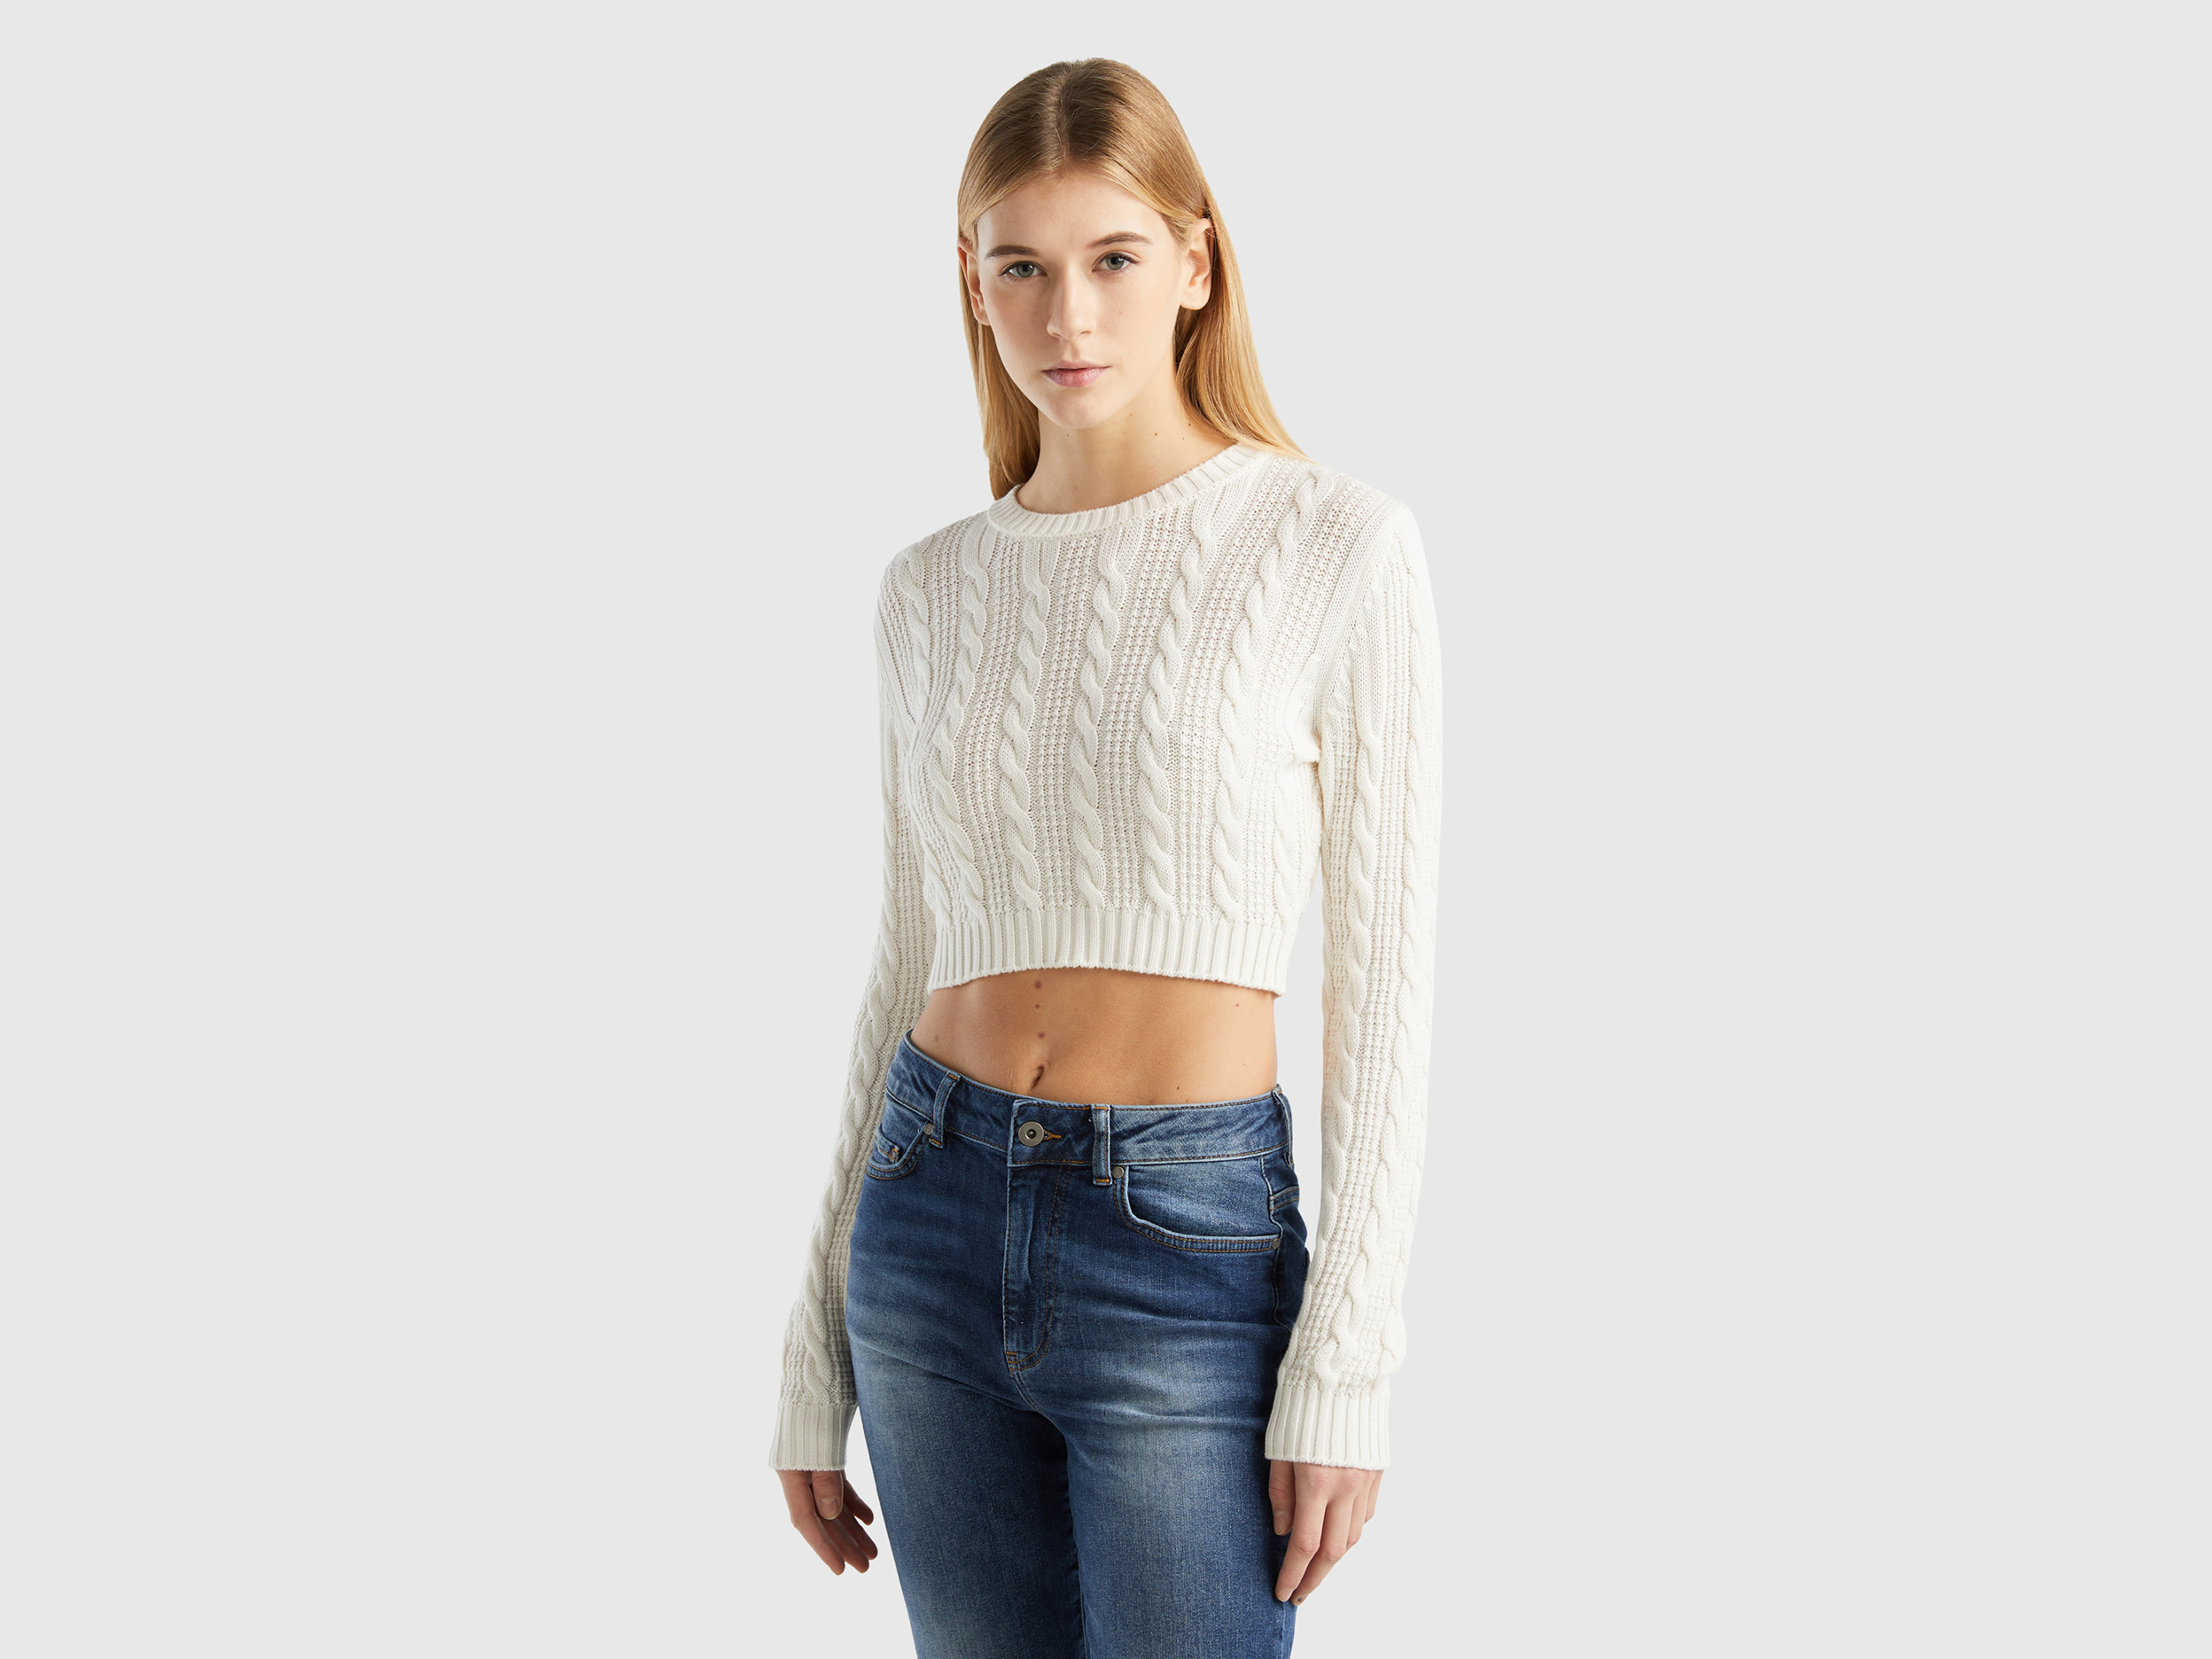 Benetton, Cropped Cable Knit Sweater, size XS-S, Creamy White, Women